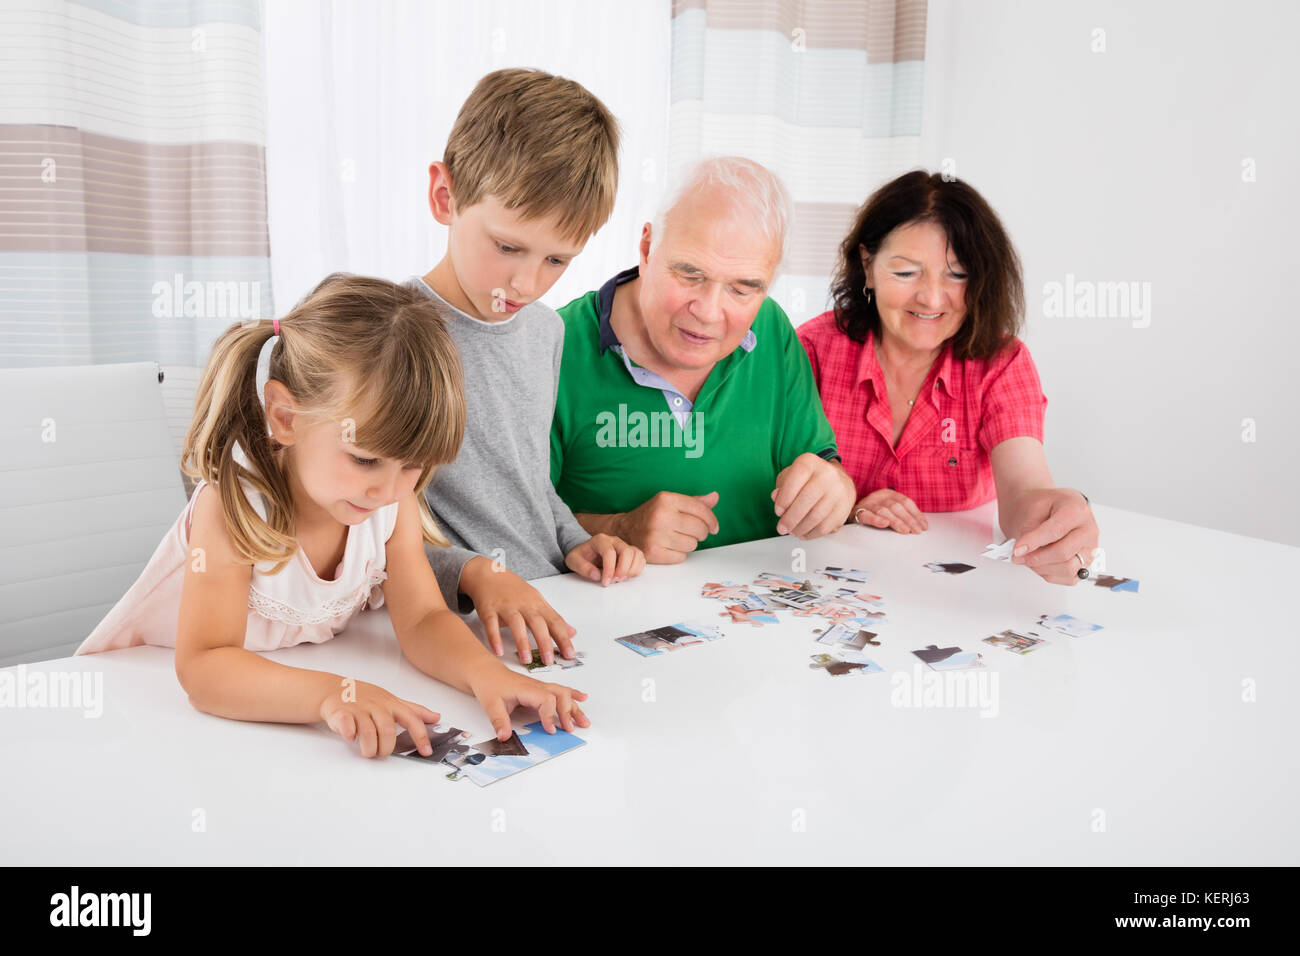 Family Holding Jigsaw Puzzle Pieces While Playing Game Together With Kids Stock Photo